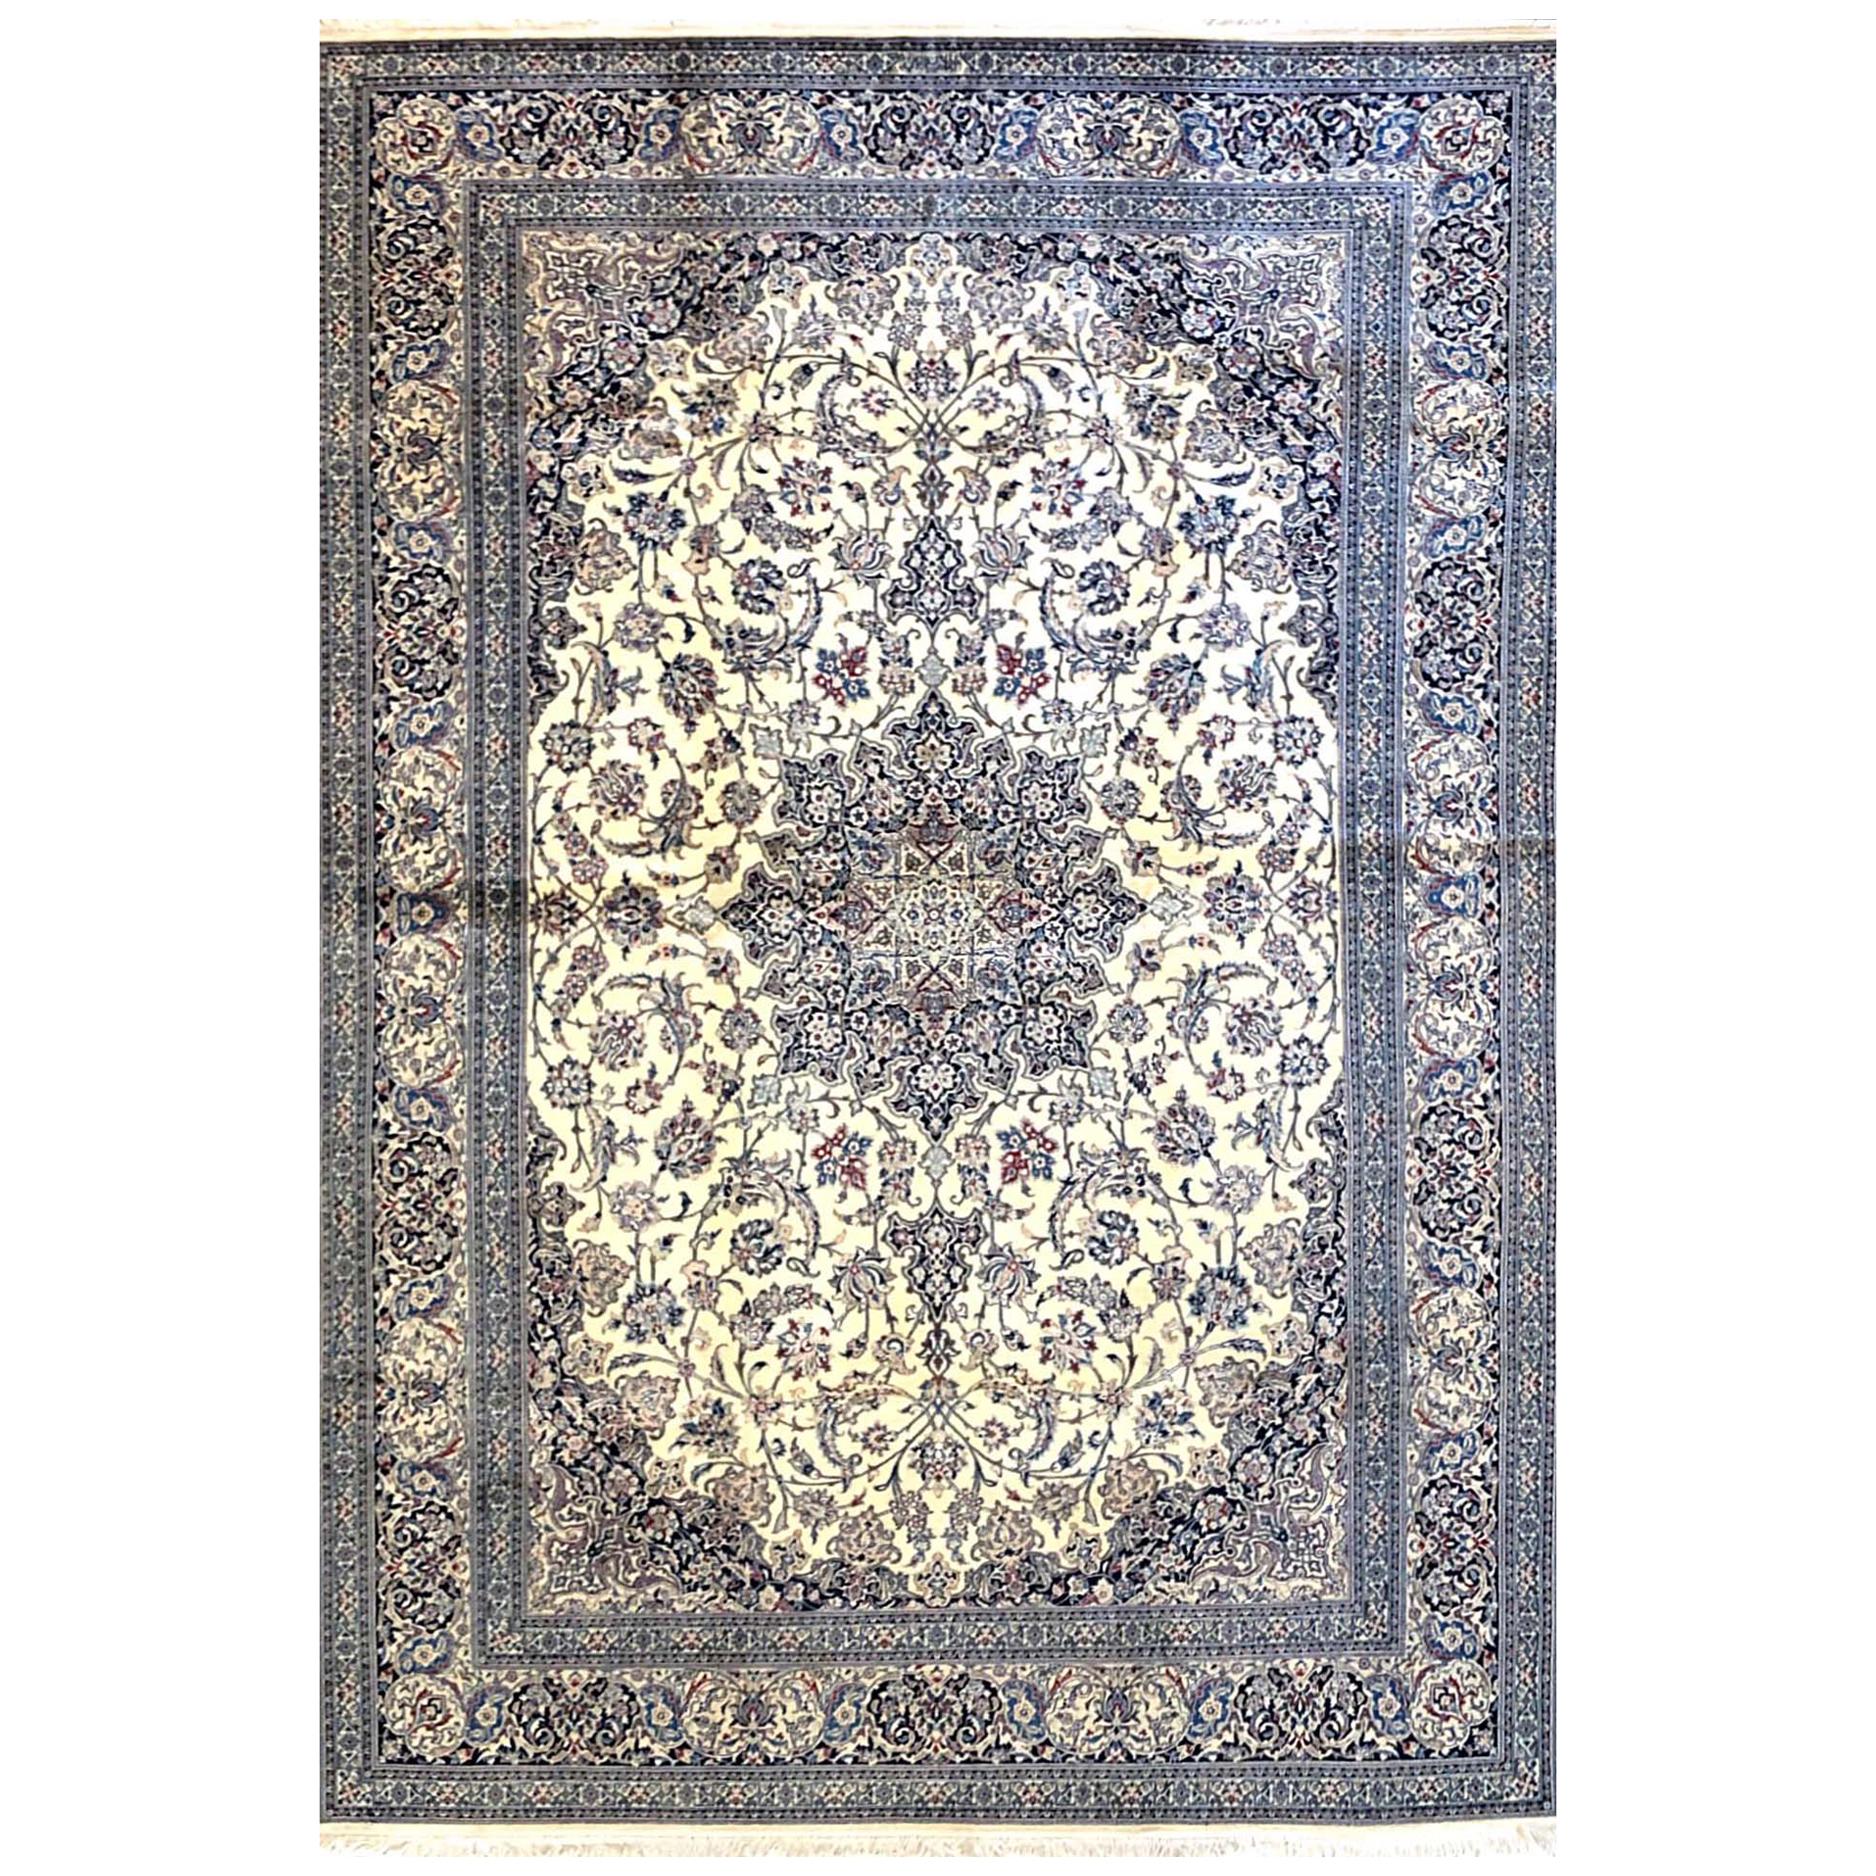 https://a.1stdibscdn.com/persian-hand-knotted-medallion-floral-cream-blue-habibian-nain-rug-4la-for-sale/1121189/f_156416521564500182455/15641652_master.jpg